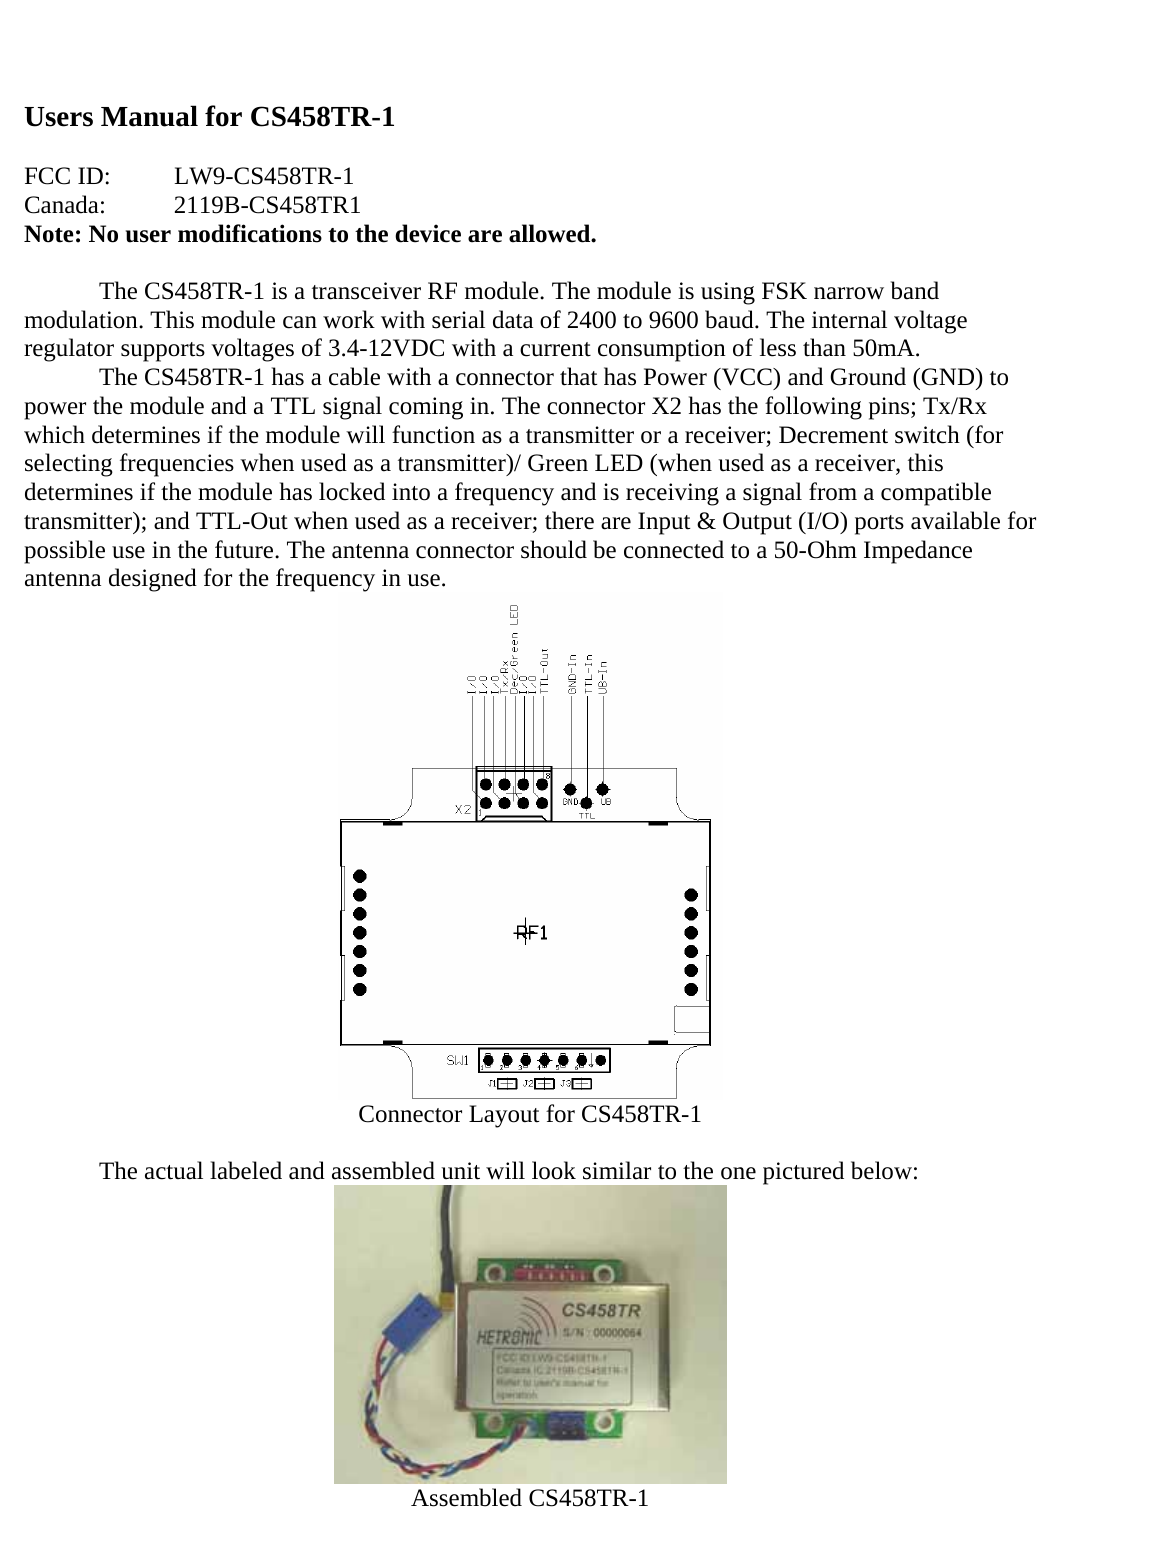 Users Manual for CS458TR-1  FCC ID:  LW9-CS458TR-1 Canada:   2119B-CS458TR1 Note: No user modifications to the device are allowed.  The CS458TR-1 is a transceiver RF module. The module is using FSK narrow band modulation. This module can work with serial data of 2400 to 9600 baud. The internal voltage regulator supports voltages of 3.4-12VDC with a current consumption of less than 50mA.   The CS458TR-1 has a cable with a connector that has Power (VCC) and Ground (GND) to power the module and a TTL signal coming in. The connector X2 has the following pins; Tx/Rx which determines if the module will function as a transmitter or a receiver; Decrement switch (for selecting frequencies when used as a transmitter)/ Green LED (when used as a receiver, this determines if the module has locked into a frequency and is receiving a signal from a compatible transmitter); and TTL-Out when used as a receiver; there are Input &amp; Output (I/O) ports available for possible use in the future. The antenna connector should be connected to a 50-Ohm Impedance antenna designed for the frequency in use.   Connector Layout for CS458TR-1   The actual labeled and assembled unit will look similar to the one pictured below:  Assembled CS458TR-1 